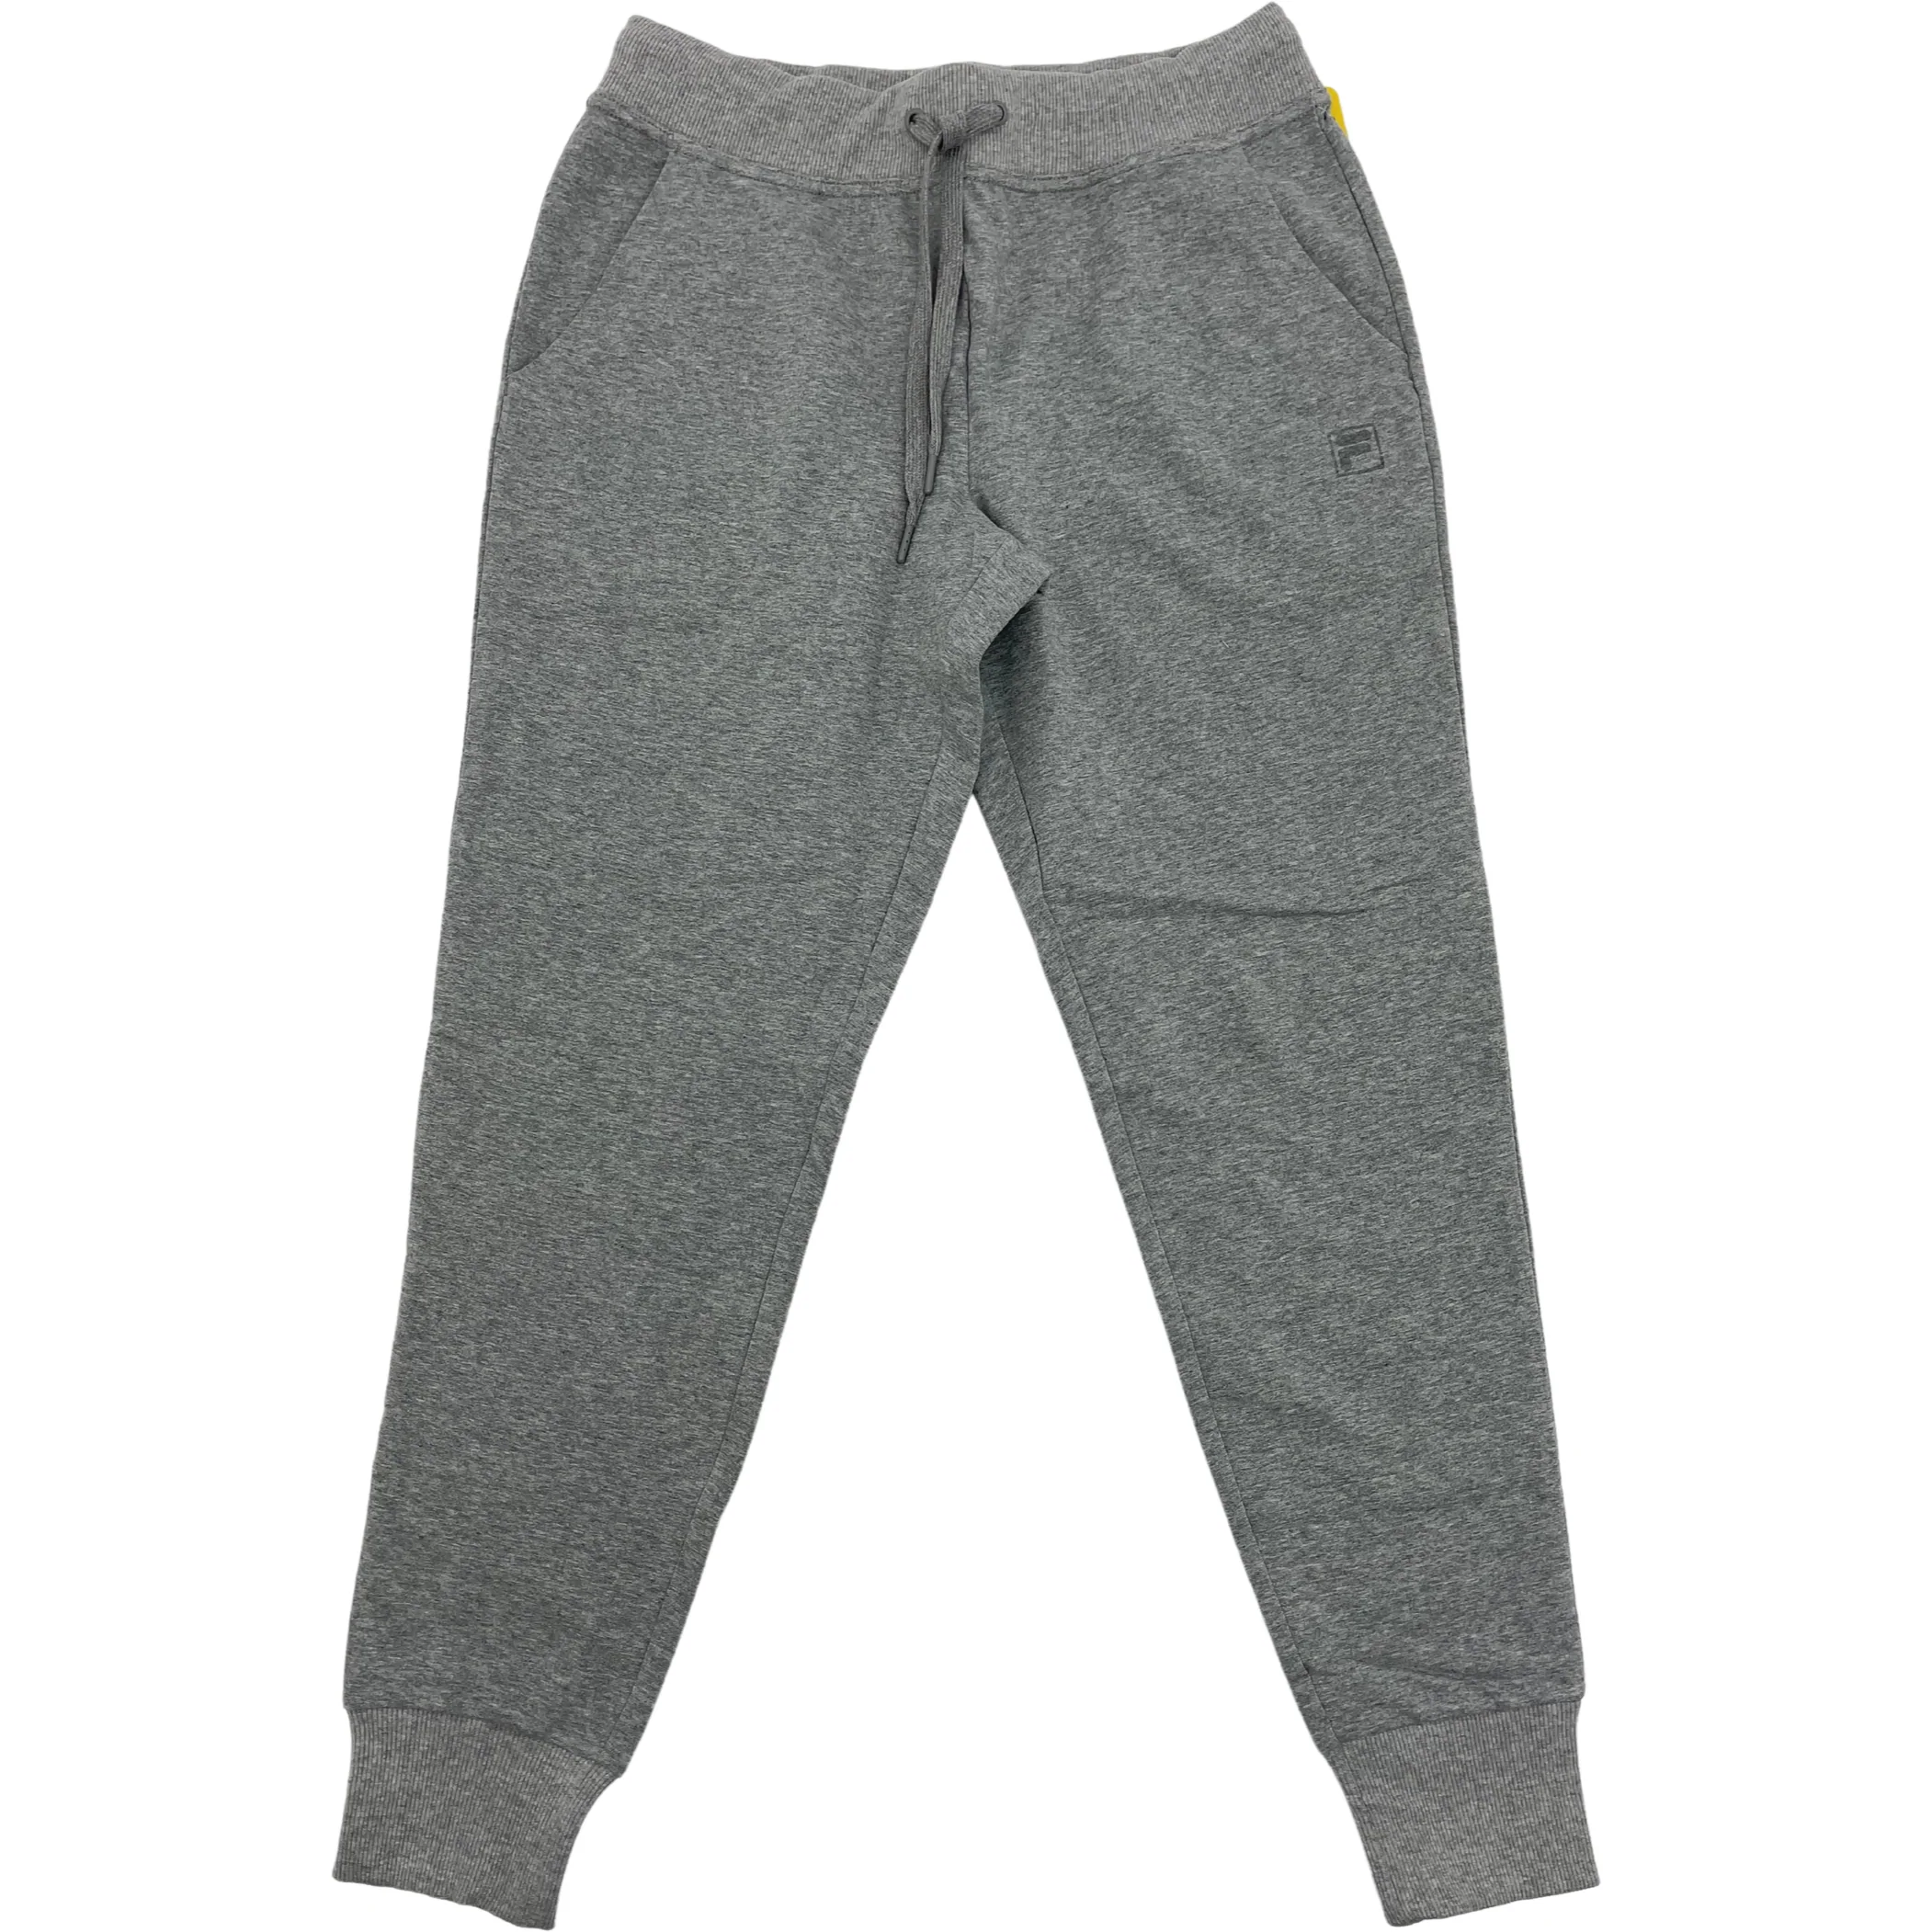 Fila French Terry Athletic Sweat Pants for Women